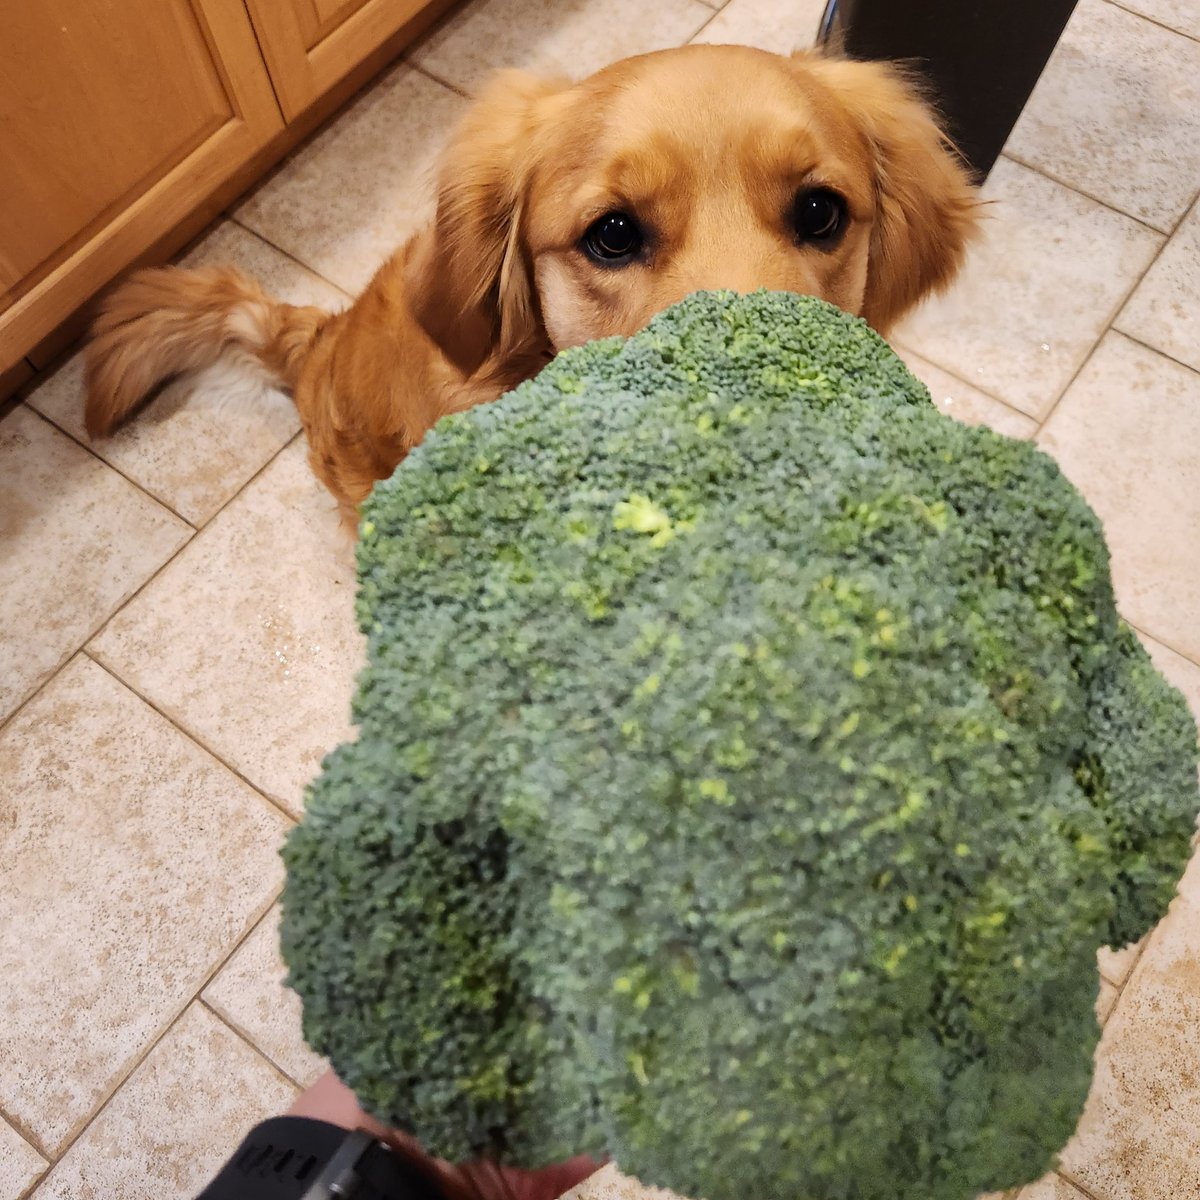 Giant broccoli!😲🥦 I don't think I've seen one this large. It is one plant! Yup, bigger than Sparky's head😂
I'm using it in my tofu stir fry tonight! 
#Sparky #broccoli #giant #food #vegrecipes #vegetarian #giant #dogvsbrocoli